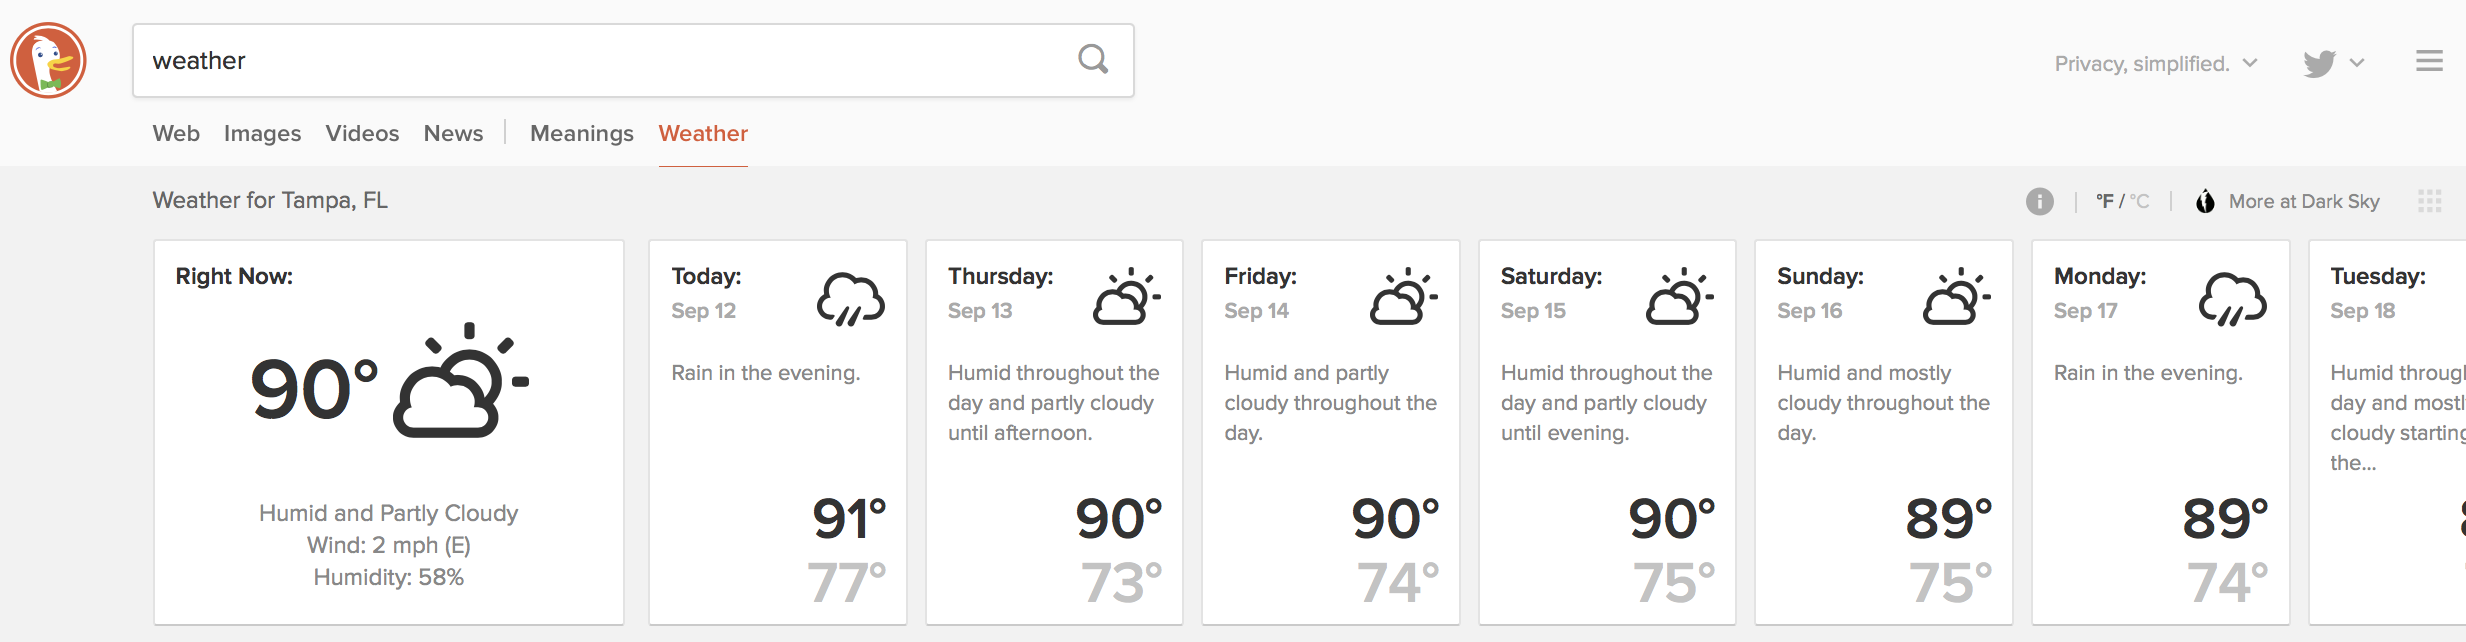 Screenshot of localized weather results from DuckDuckGo.